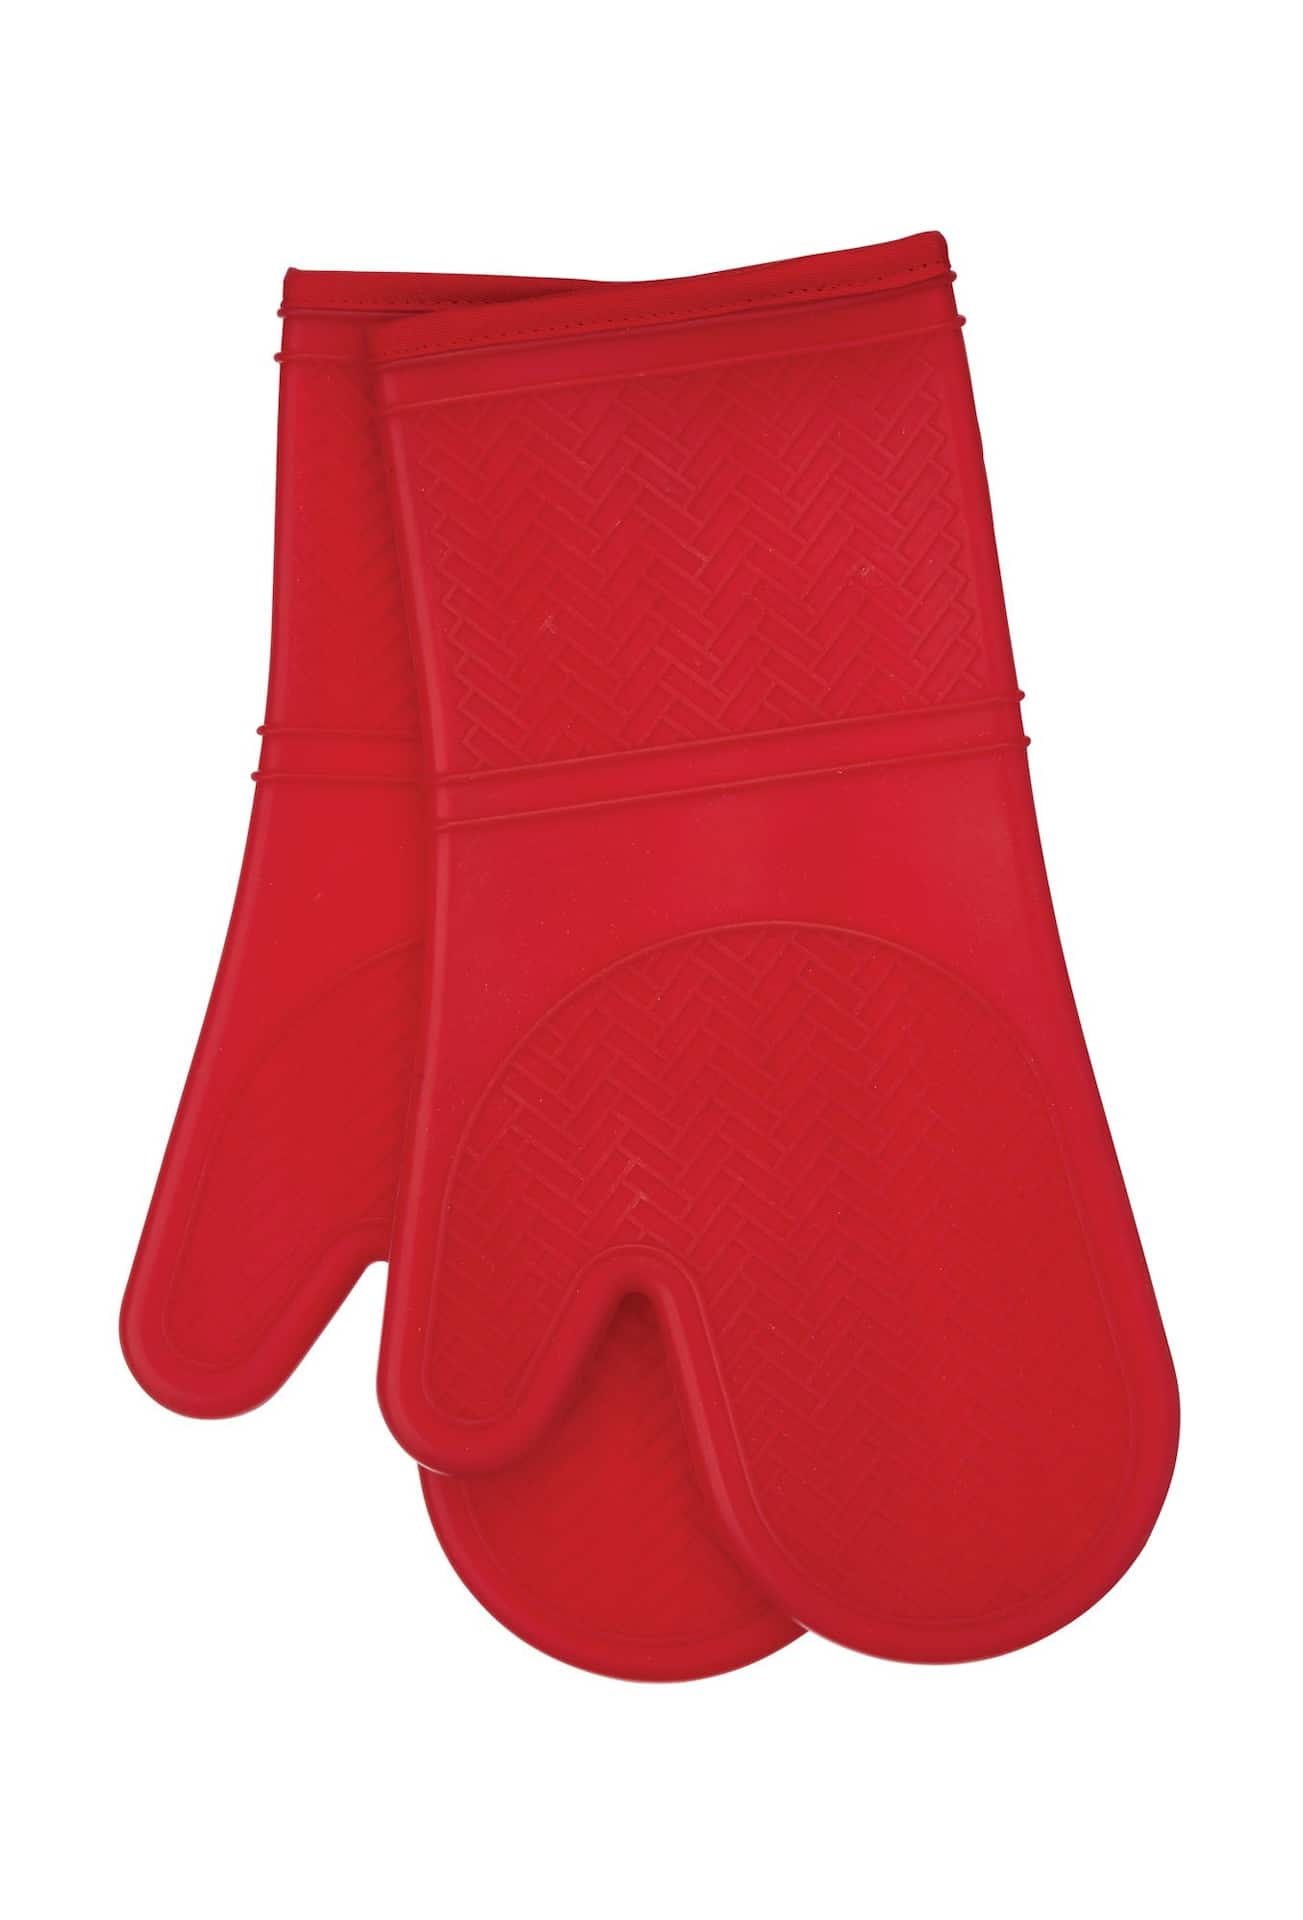 Ove Glove Kevlar Oven Mitt with Silicone Grips, Machine Washable